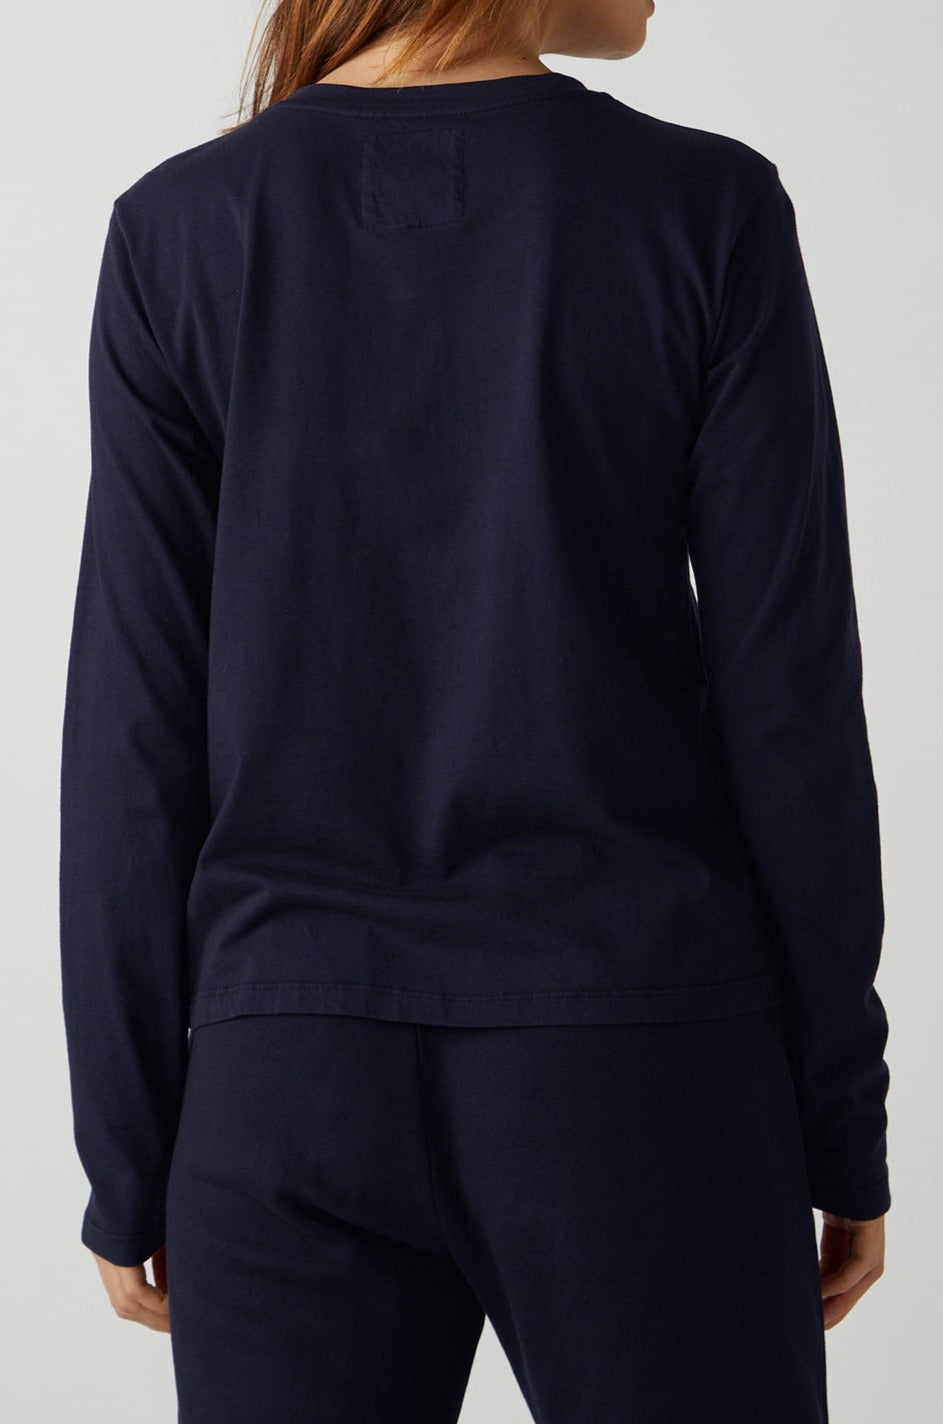   Vicente Tee in navy with Zuma Sweatpant back 